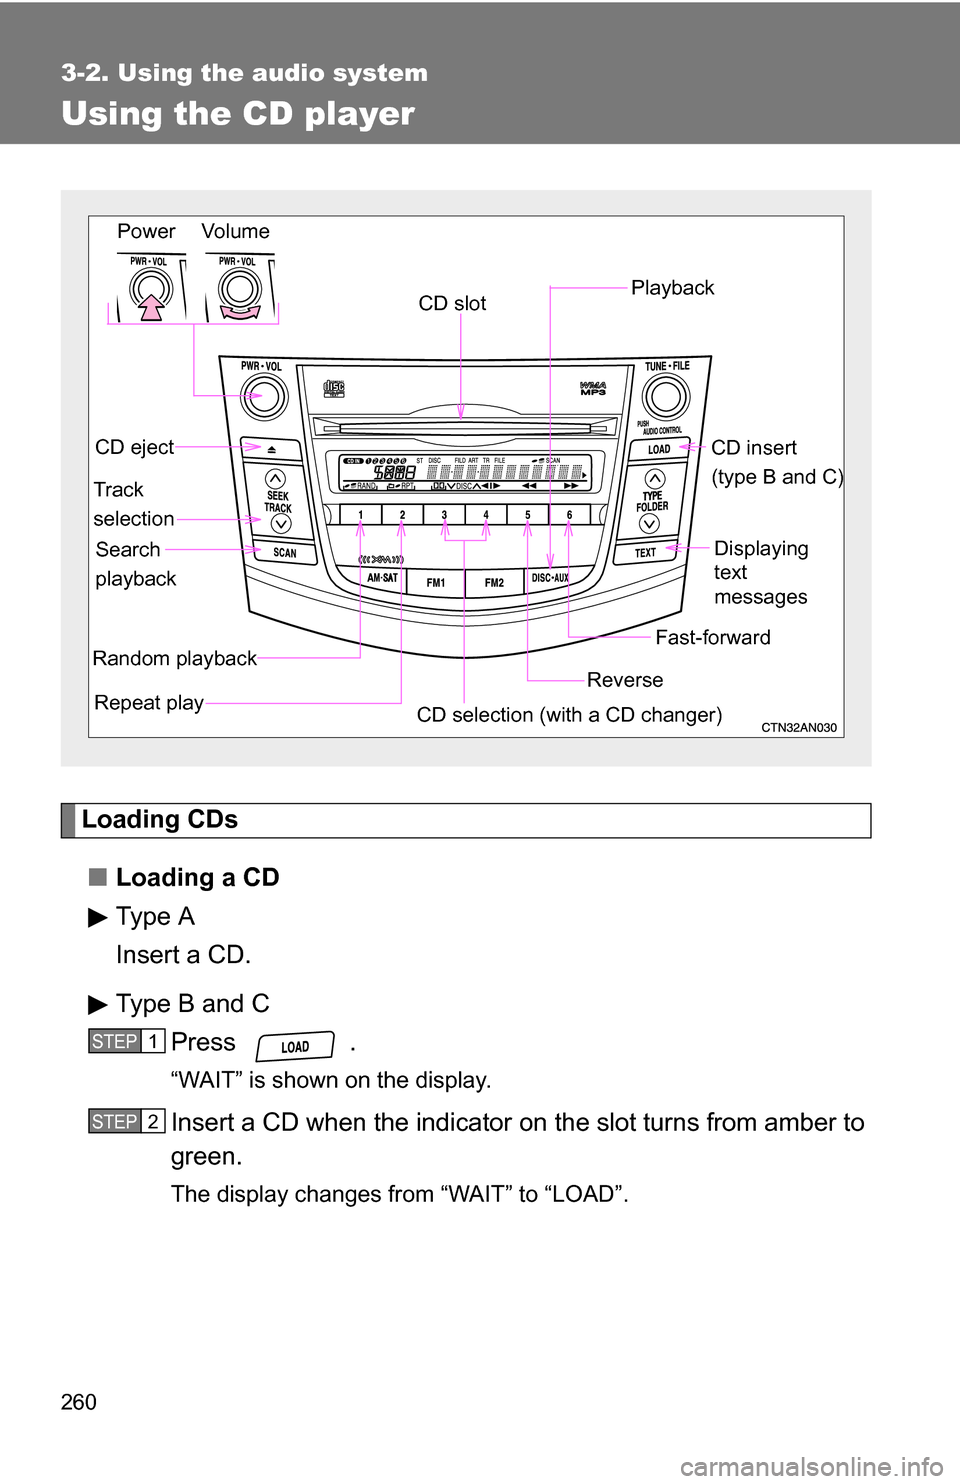 TOYOTA RAV4 2012 XA30 / 3.G Owners Manual 260
3-2. Using the audio system
Using the CD player
Loading CDs■ Loading a CD
Type A
Insert a CD.
Type B and C
Press .
“WAIT” is shown on the display.
Insert a CD when the indicator  on the slot